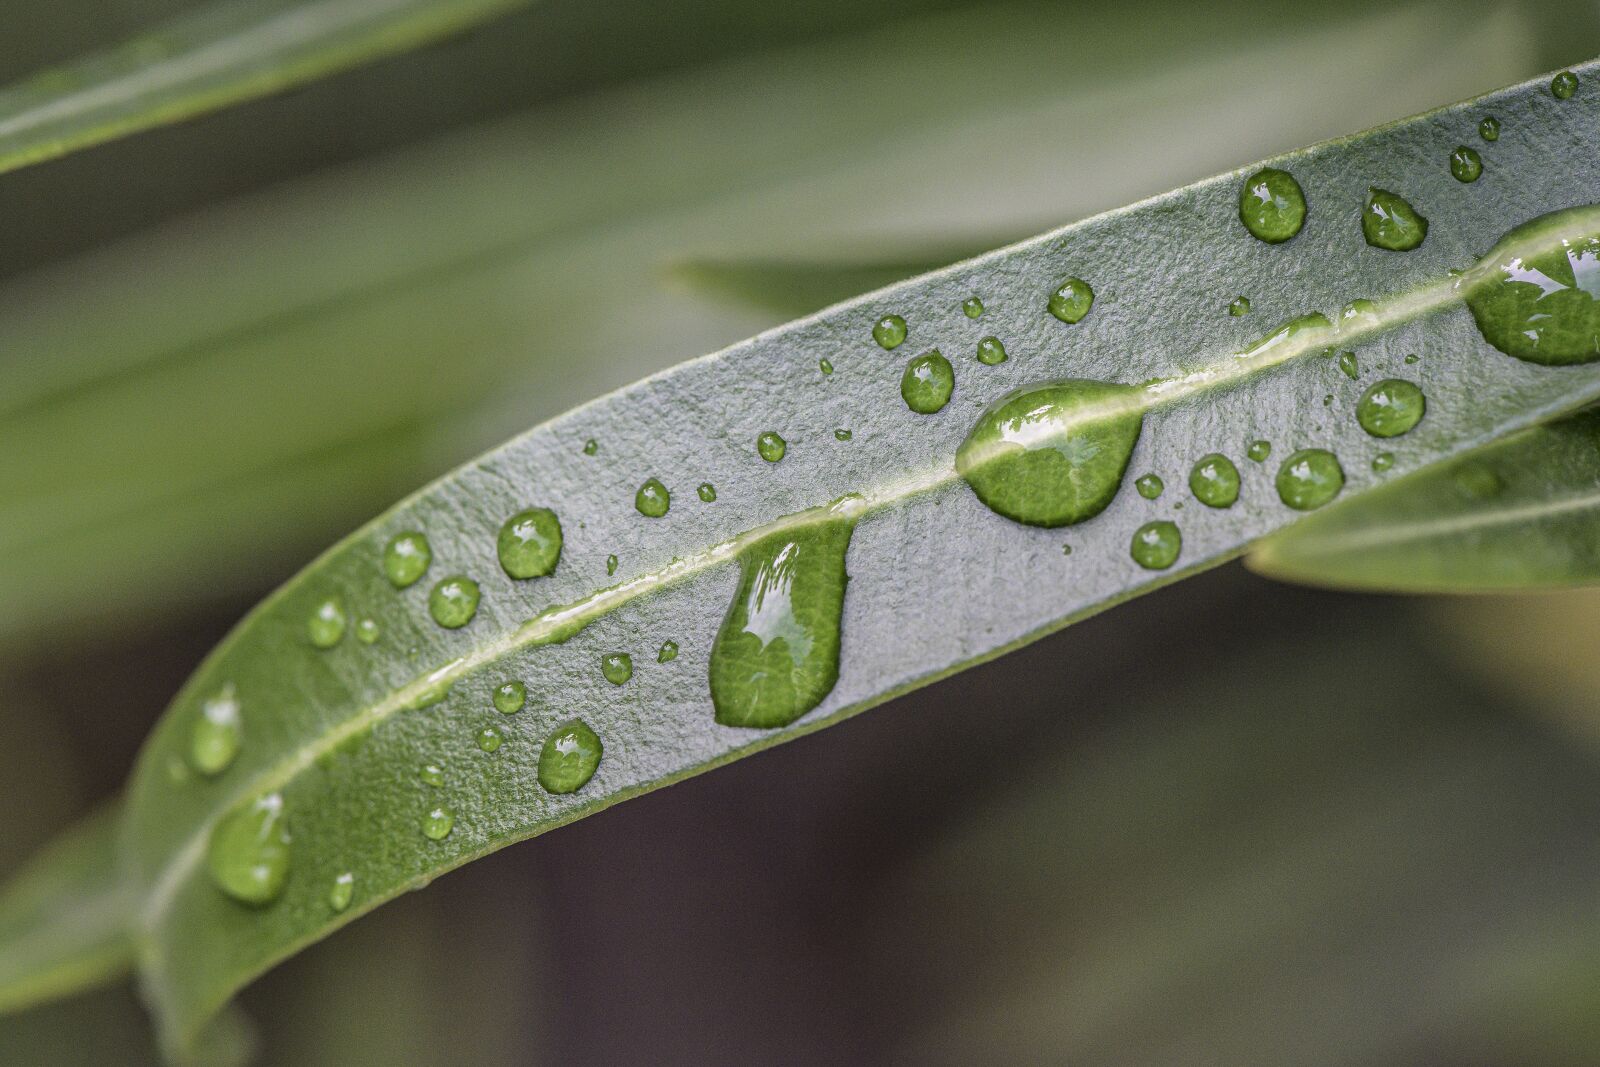 Nikon Z7 sample photo. Drop of water, leaf photography